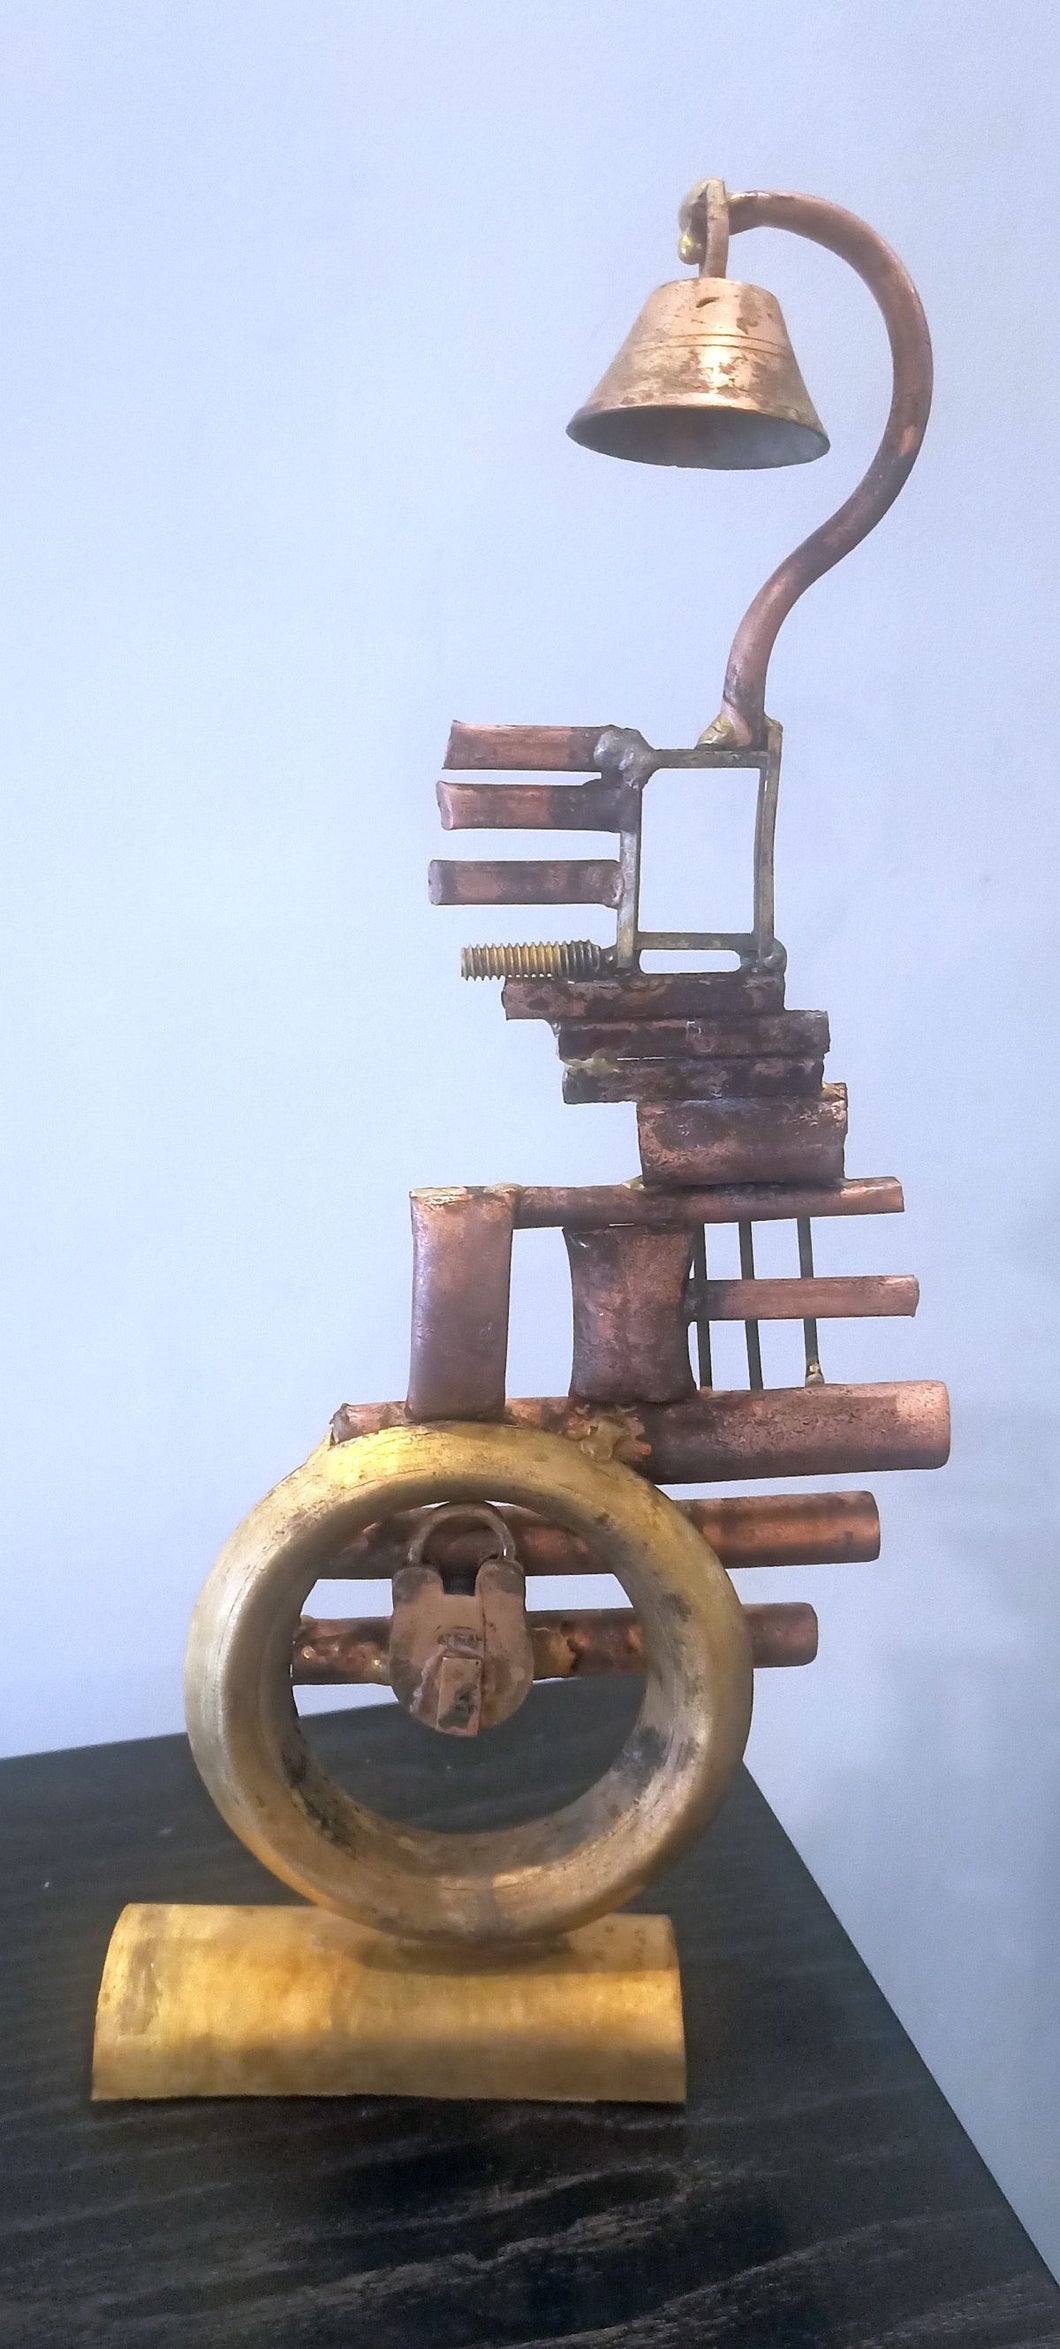 Time-Lock contemporary metal-art sculpture by Tapos Das